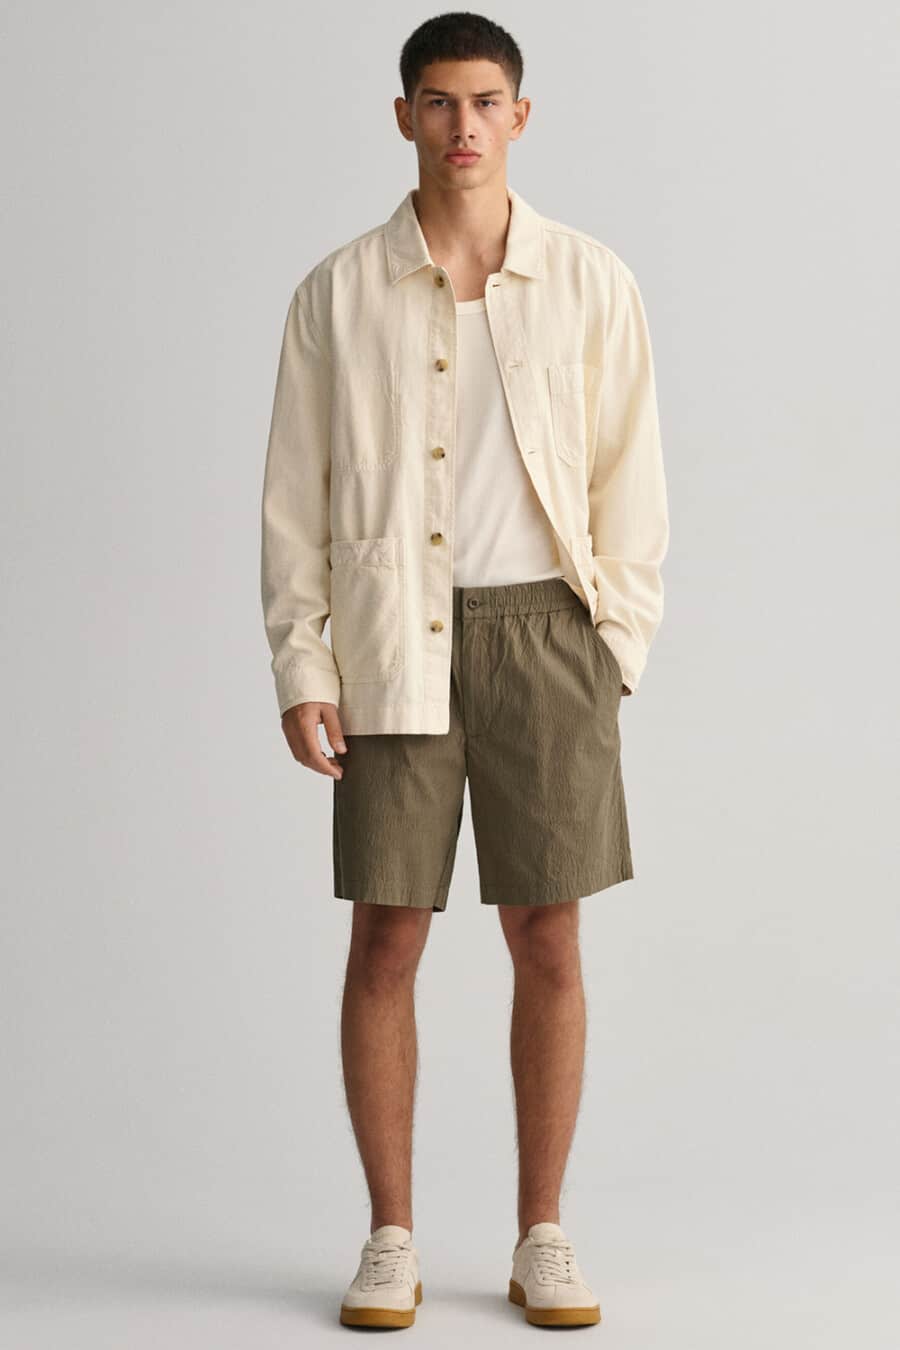 Men's olive green bermuda shorts, white vest, beige overshirt and off-white gum sole sneakers outfit